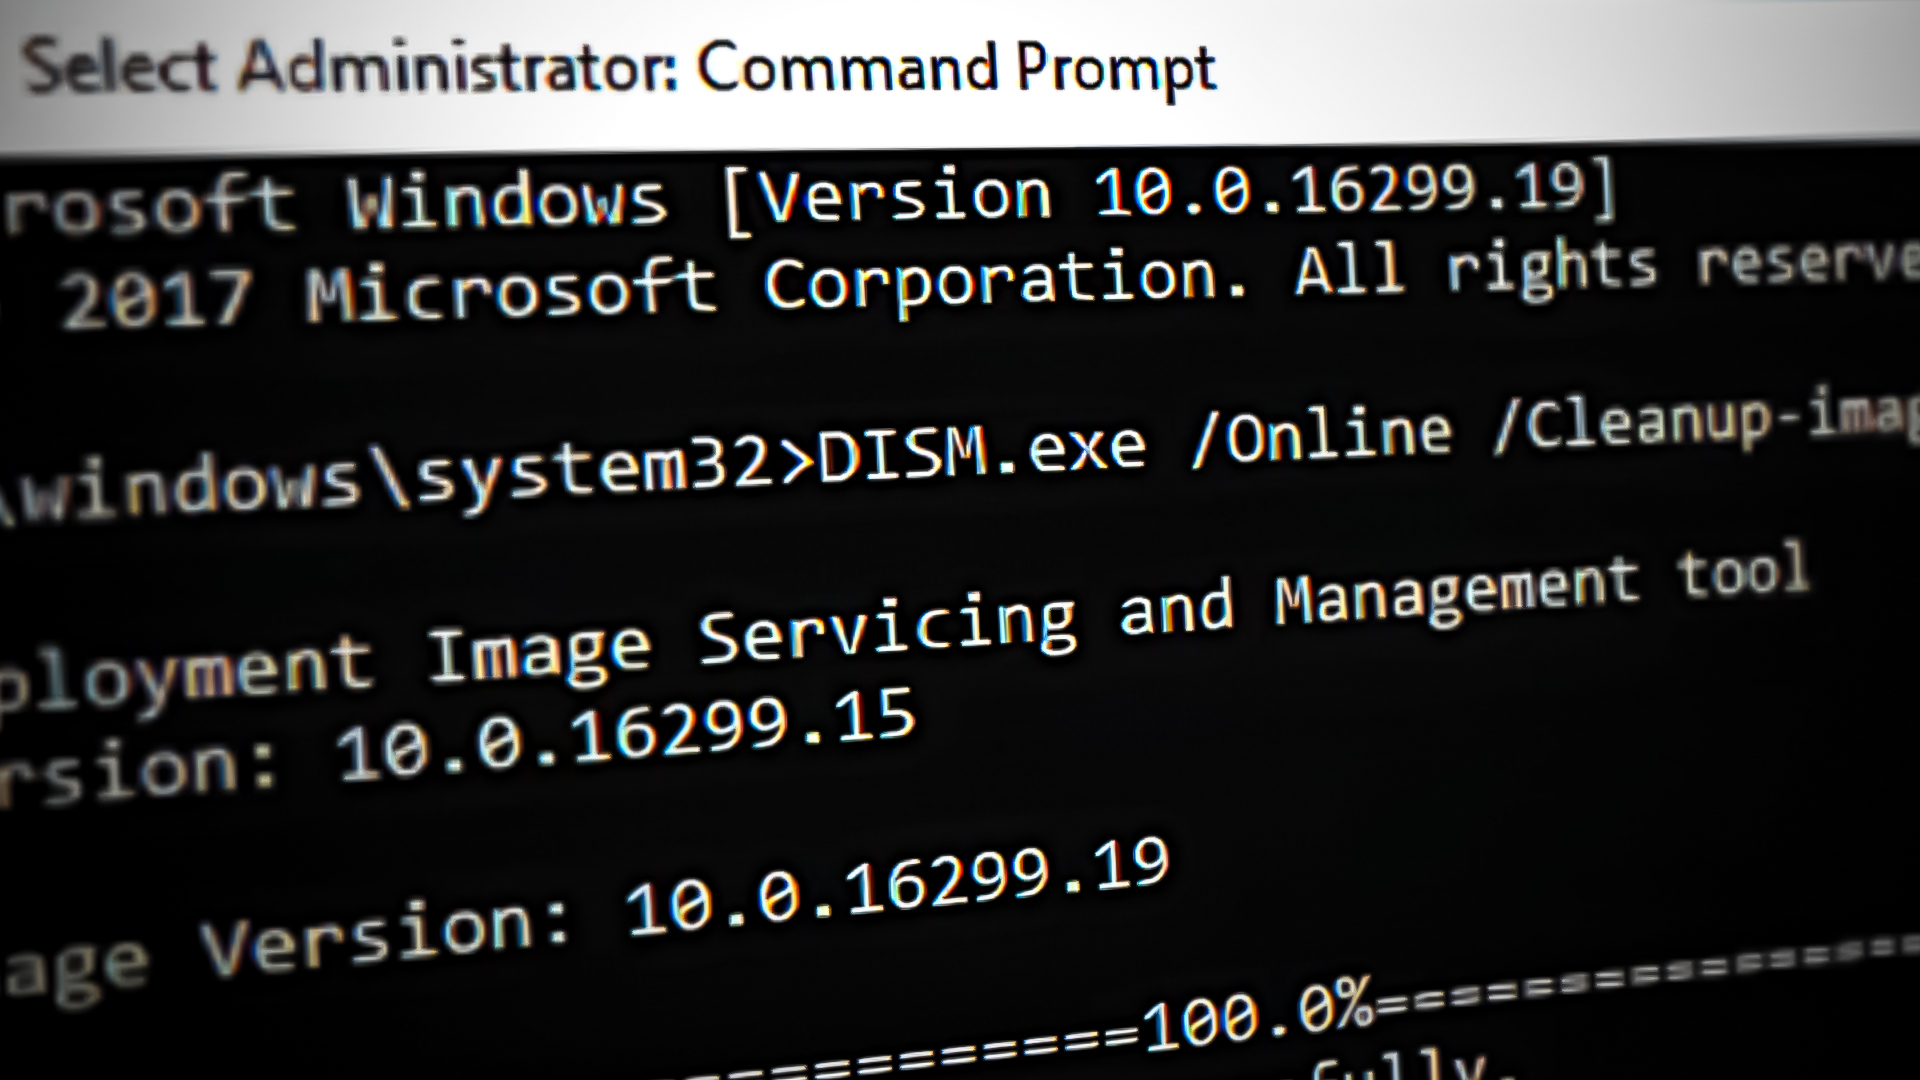 DISM Command is Stuck During its Process